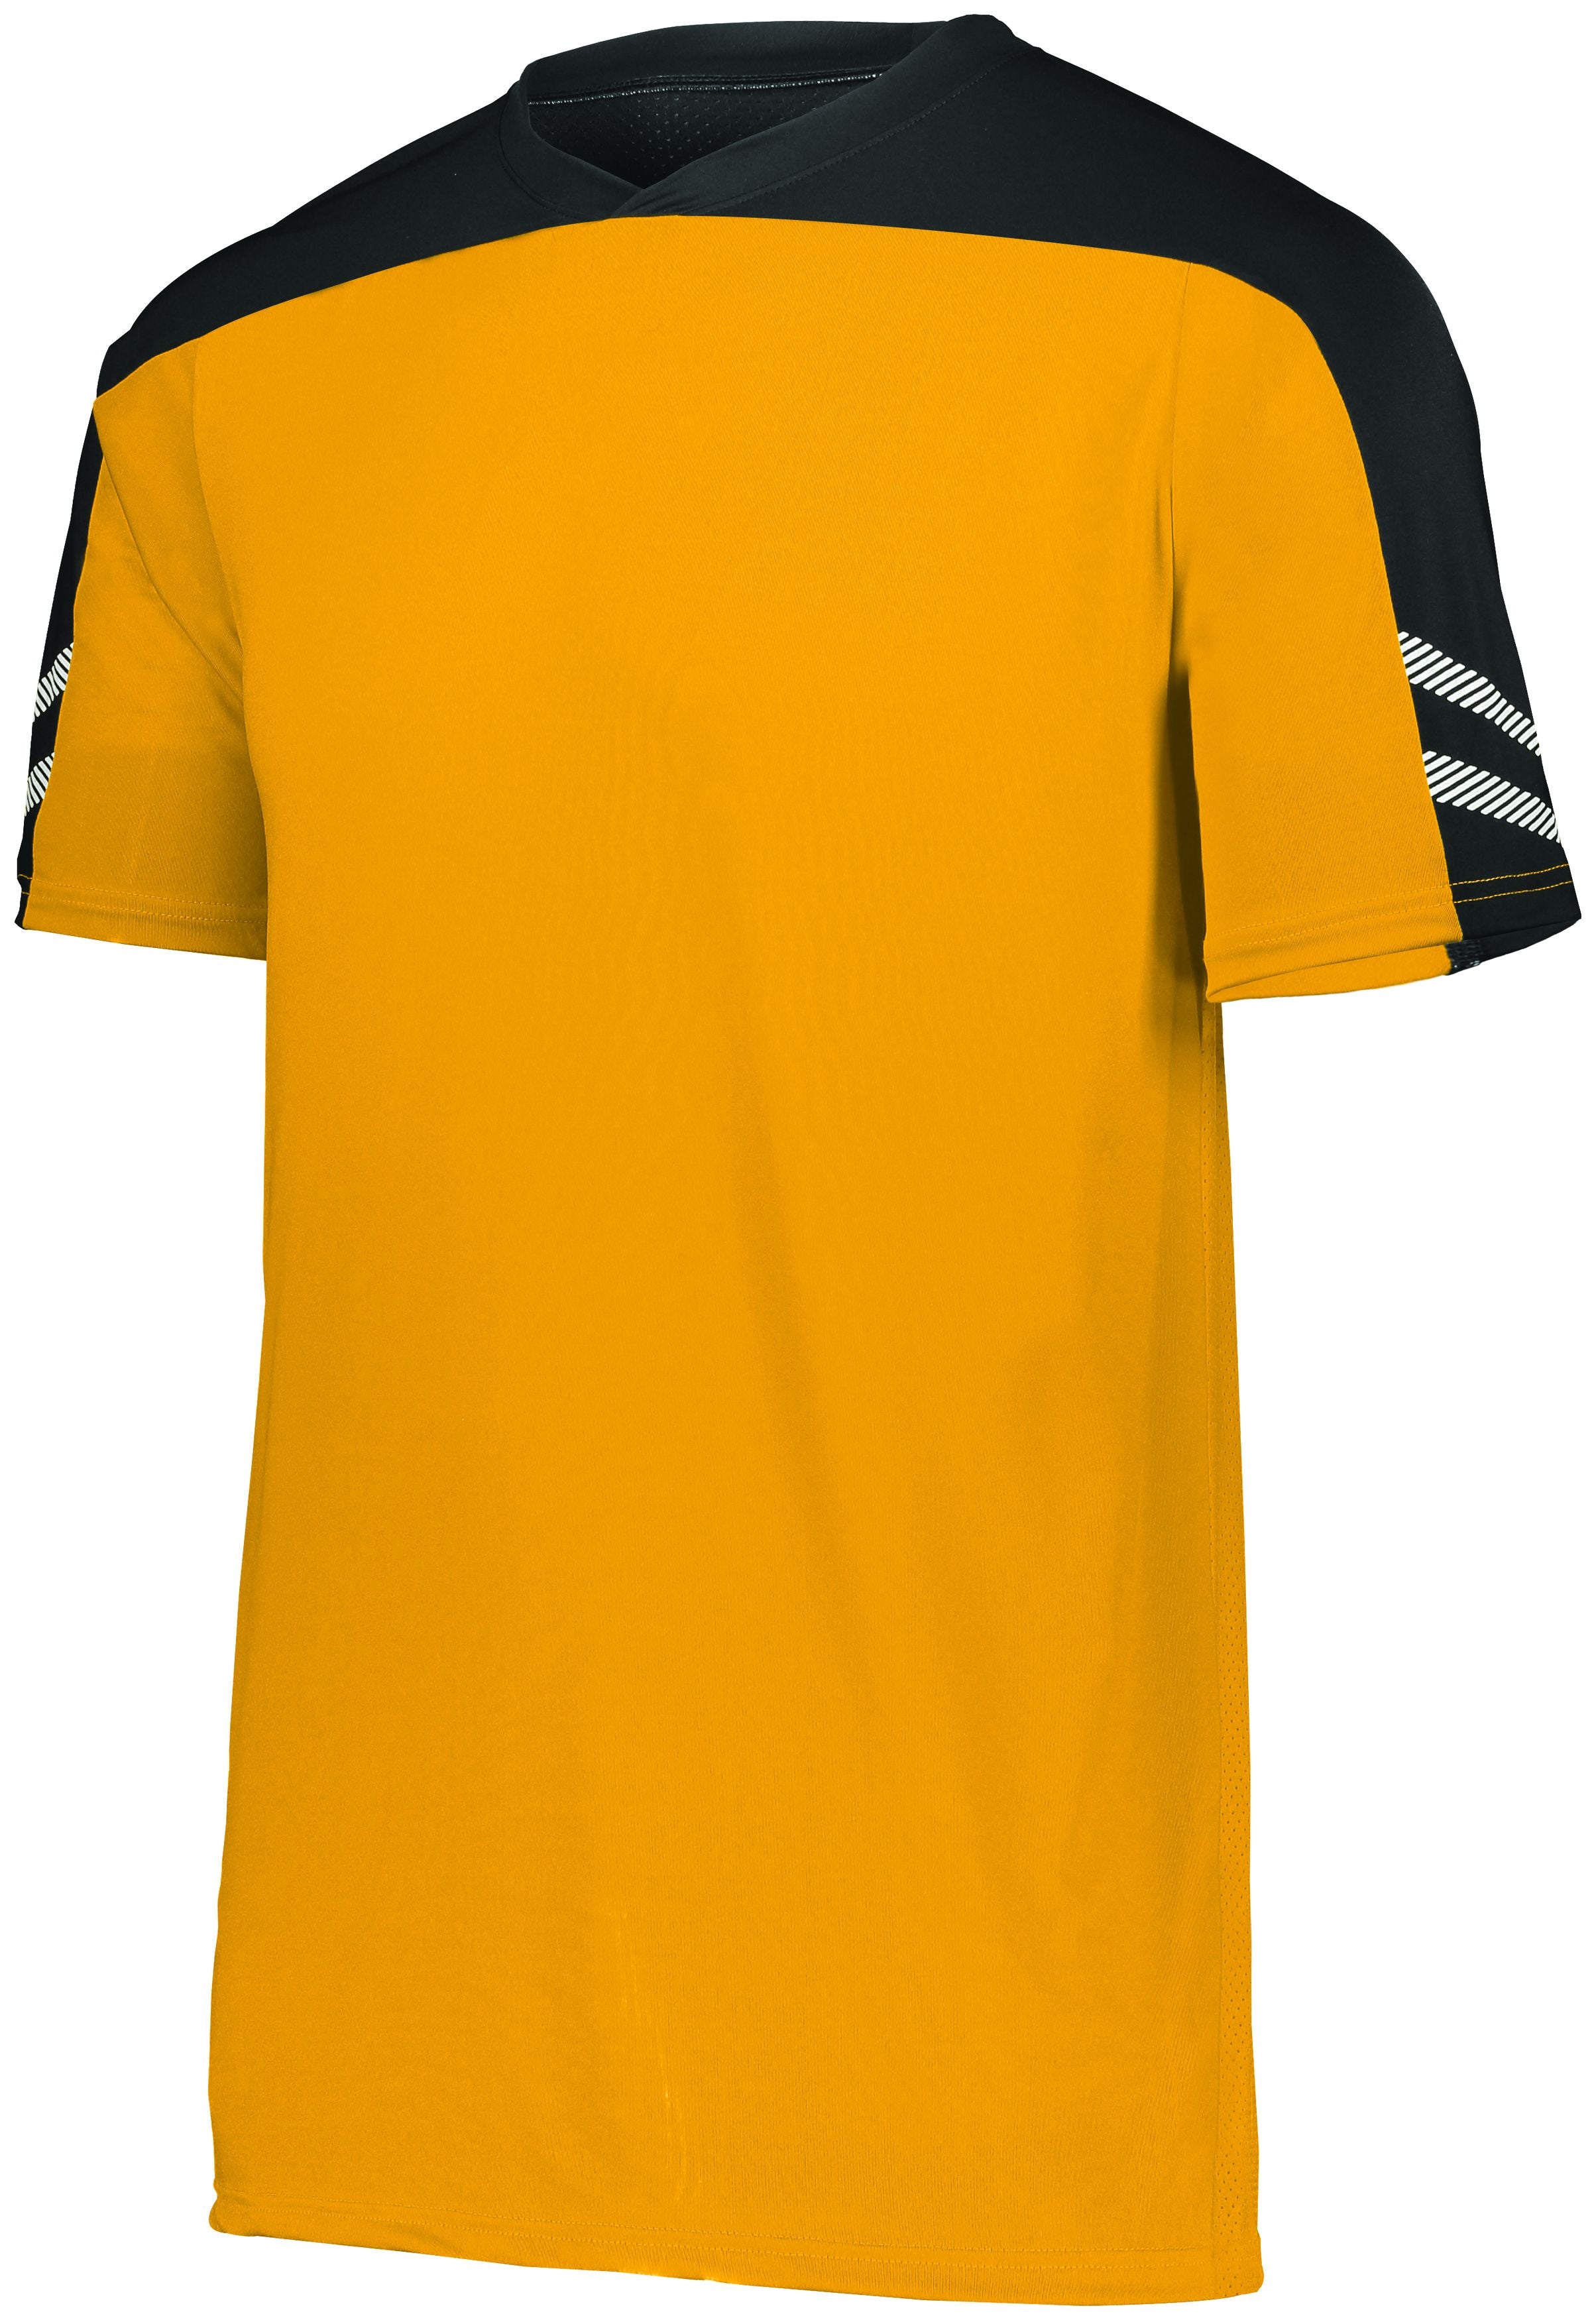 High 5 Youth Anfield Soccer Jersey